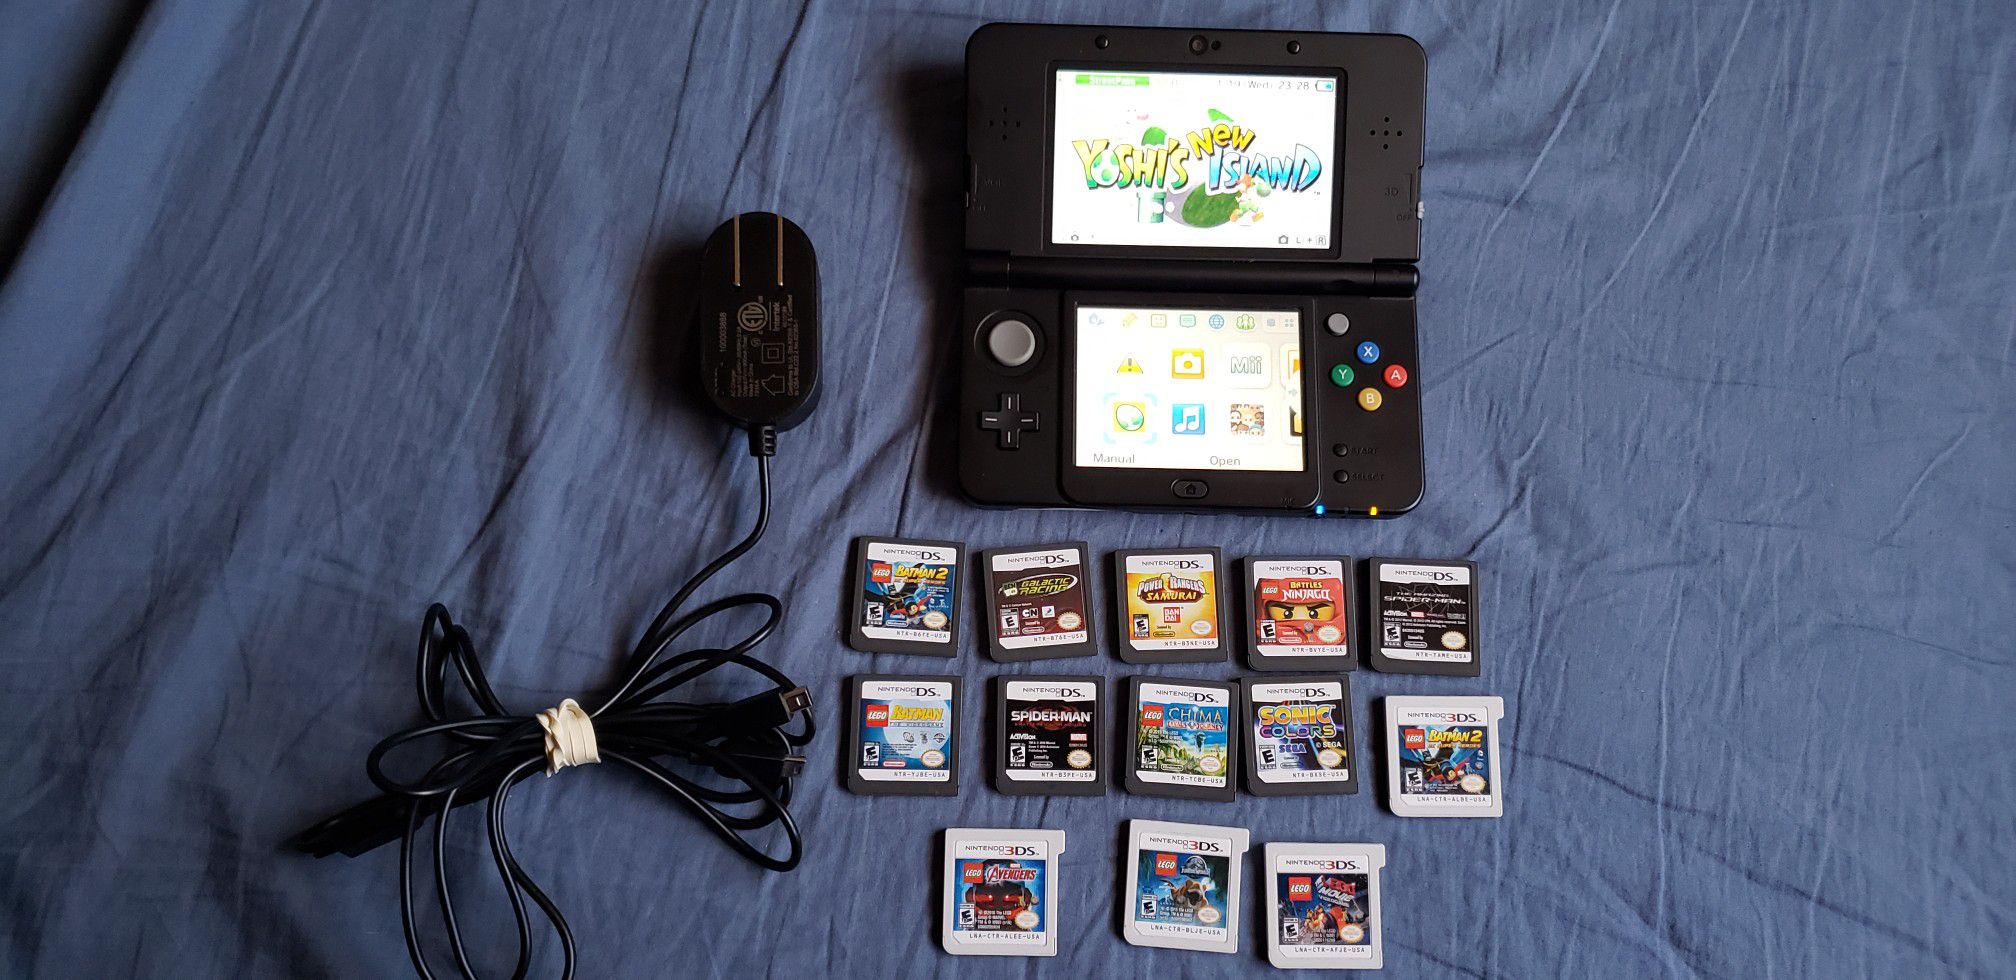 Nintendo 3ds Luigi special edition with case and 14 games for $120